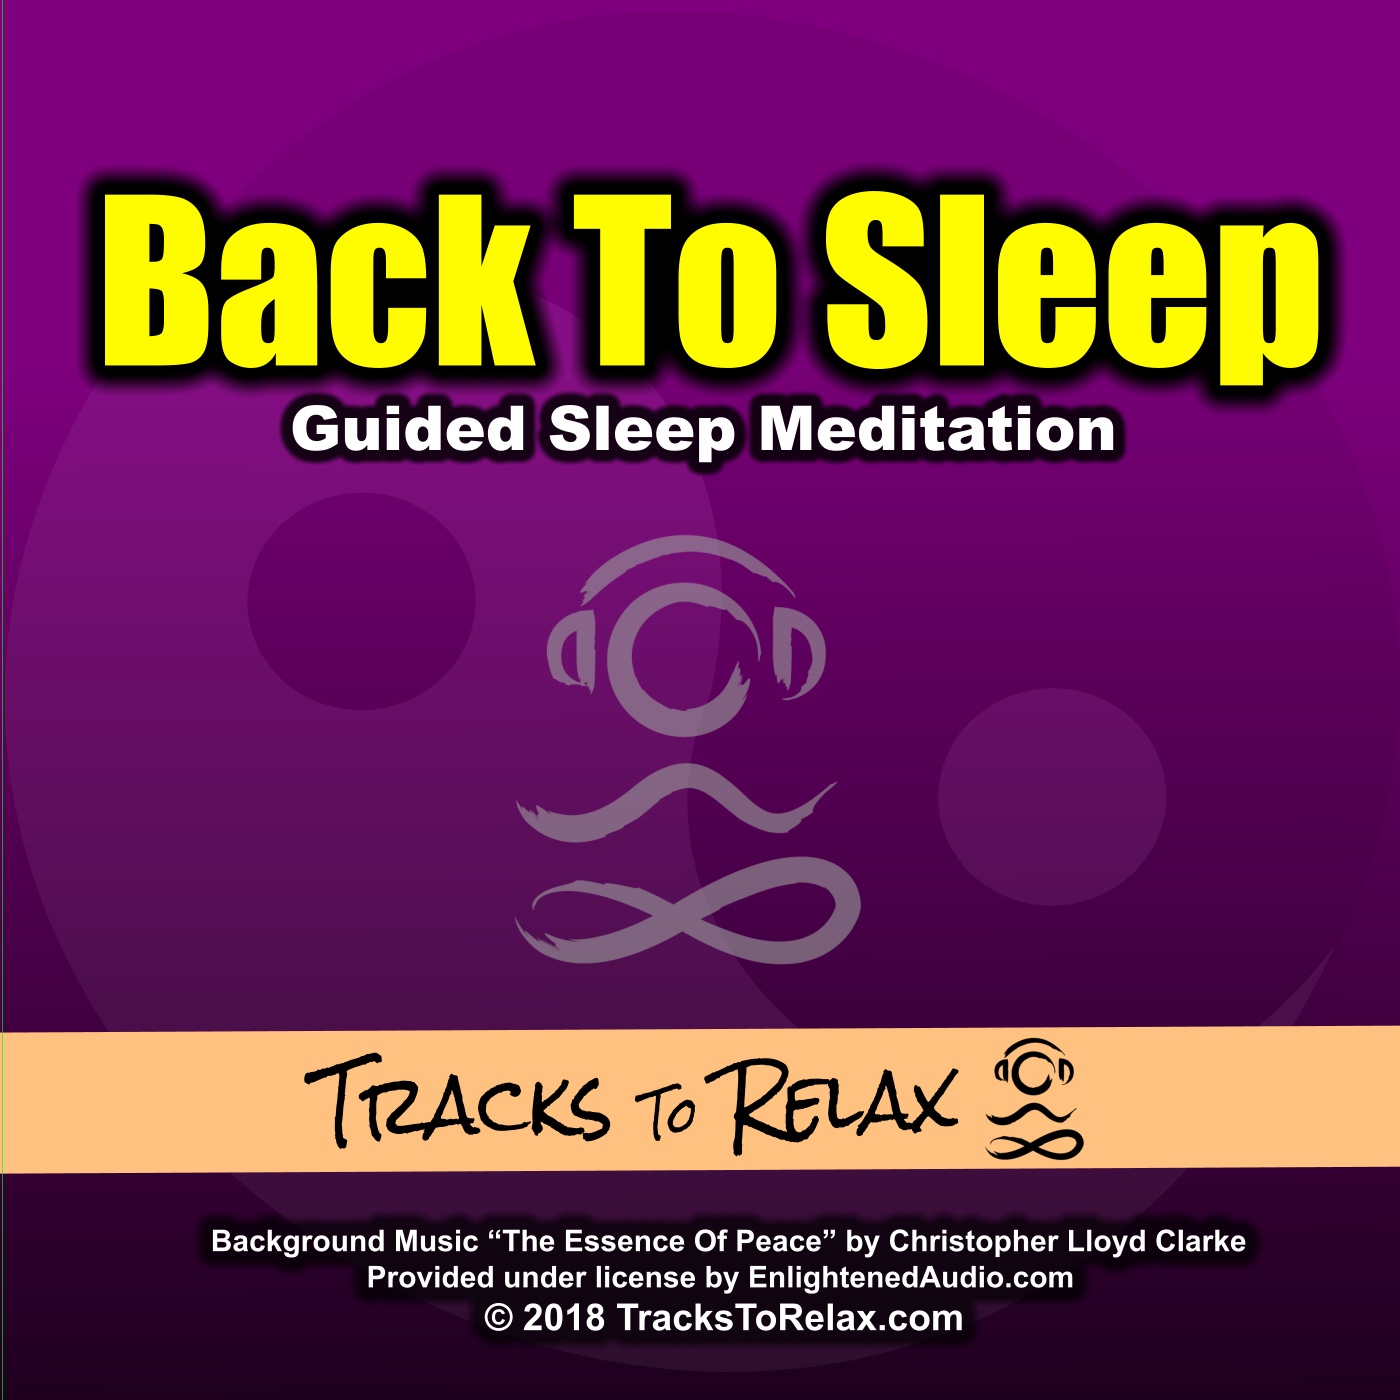 Get Back To Sleep - A Guided Meditation to help stop insomnia